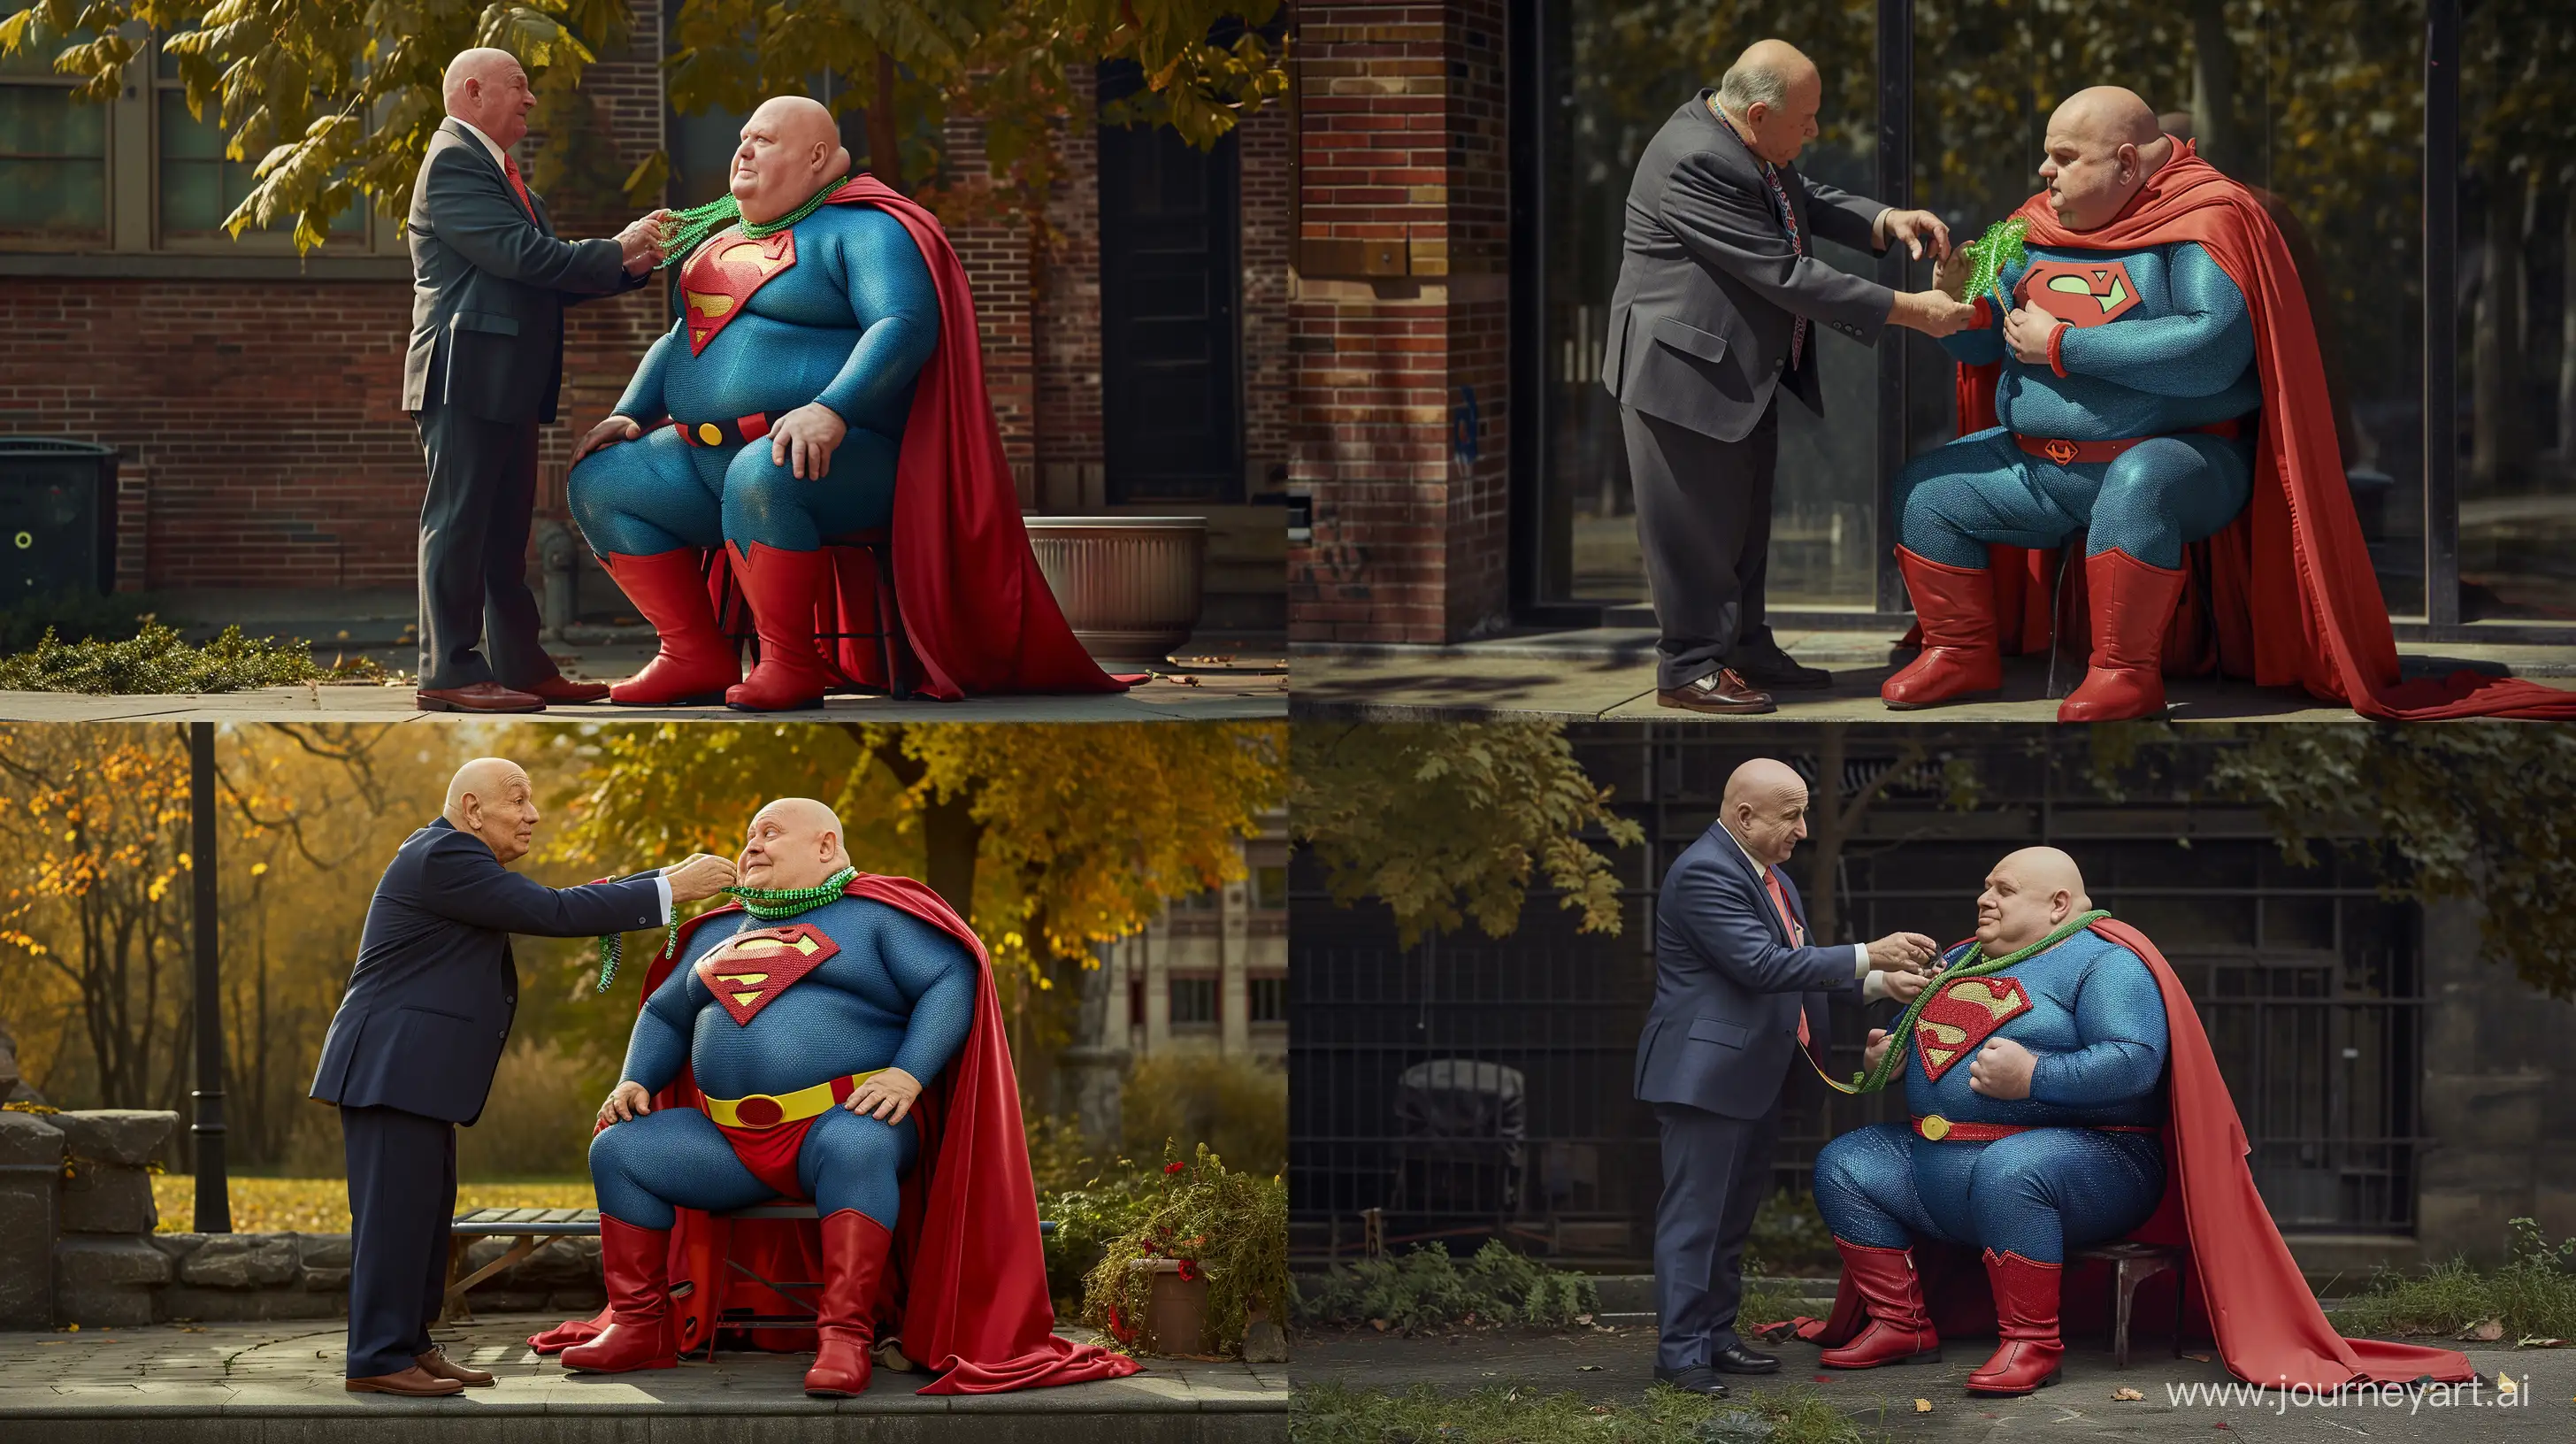 Chubby-Superman-Receives-Unique-Green-Necklace-Gift-in-Outdoor-Setting